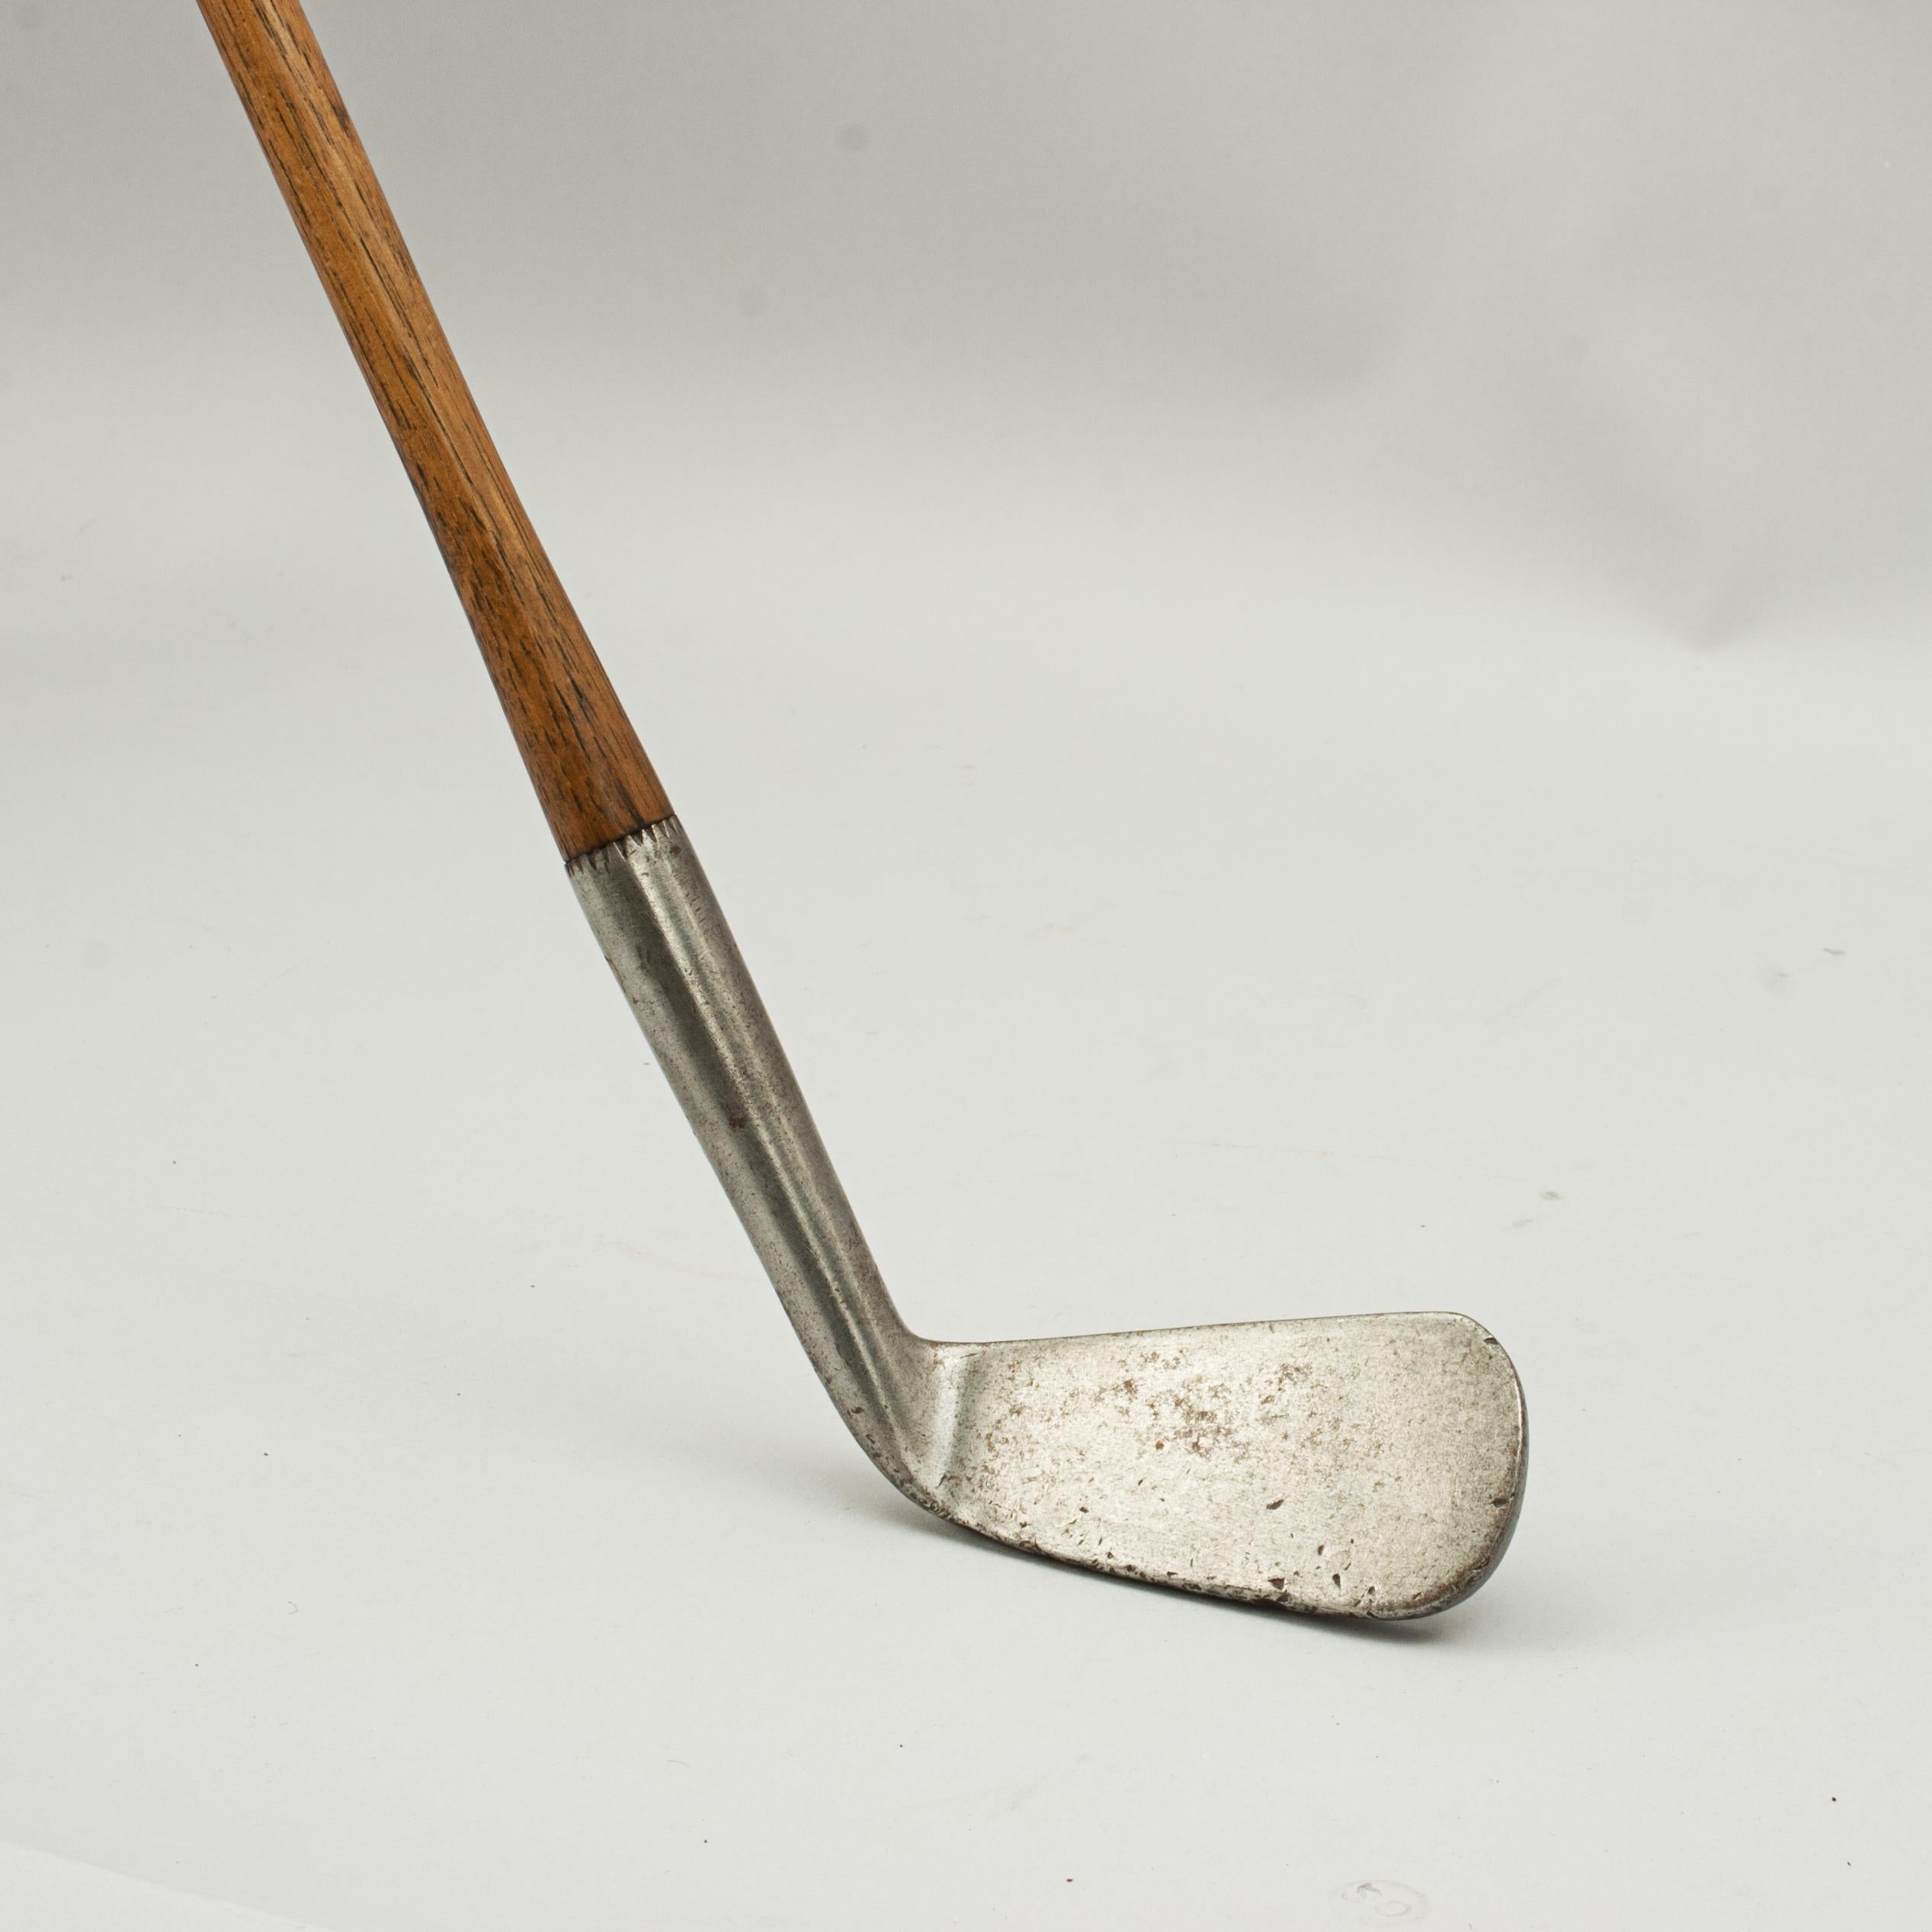 Early left hand hickory golf club.
This early large head hickory shafted lofting iron has a smooth face, hickory shaft and the remains of the original sheepskin grip. This is a fine example of an early lofting iron, maker unknown. The hosel with